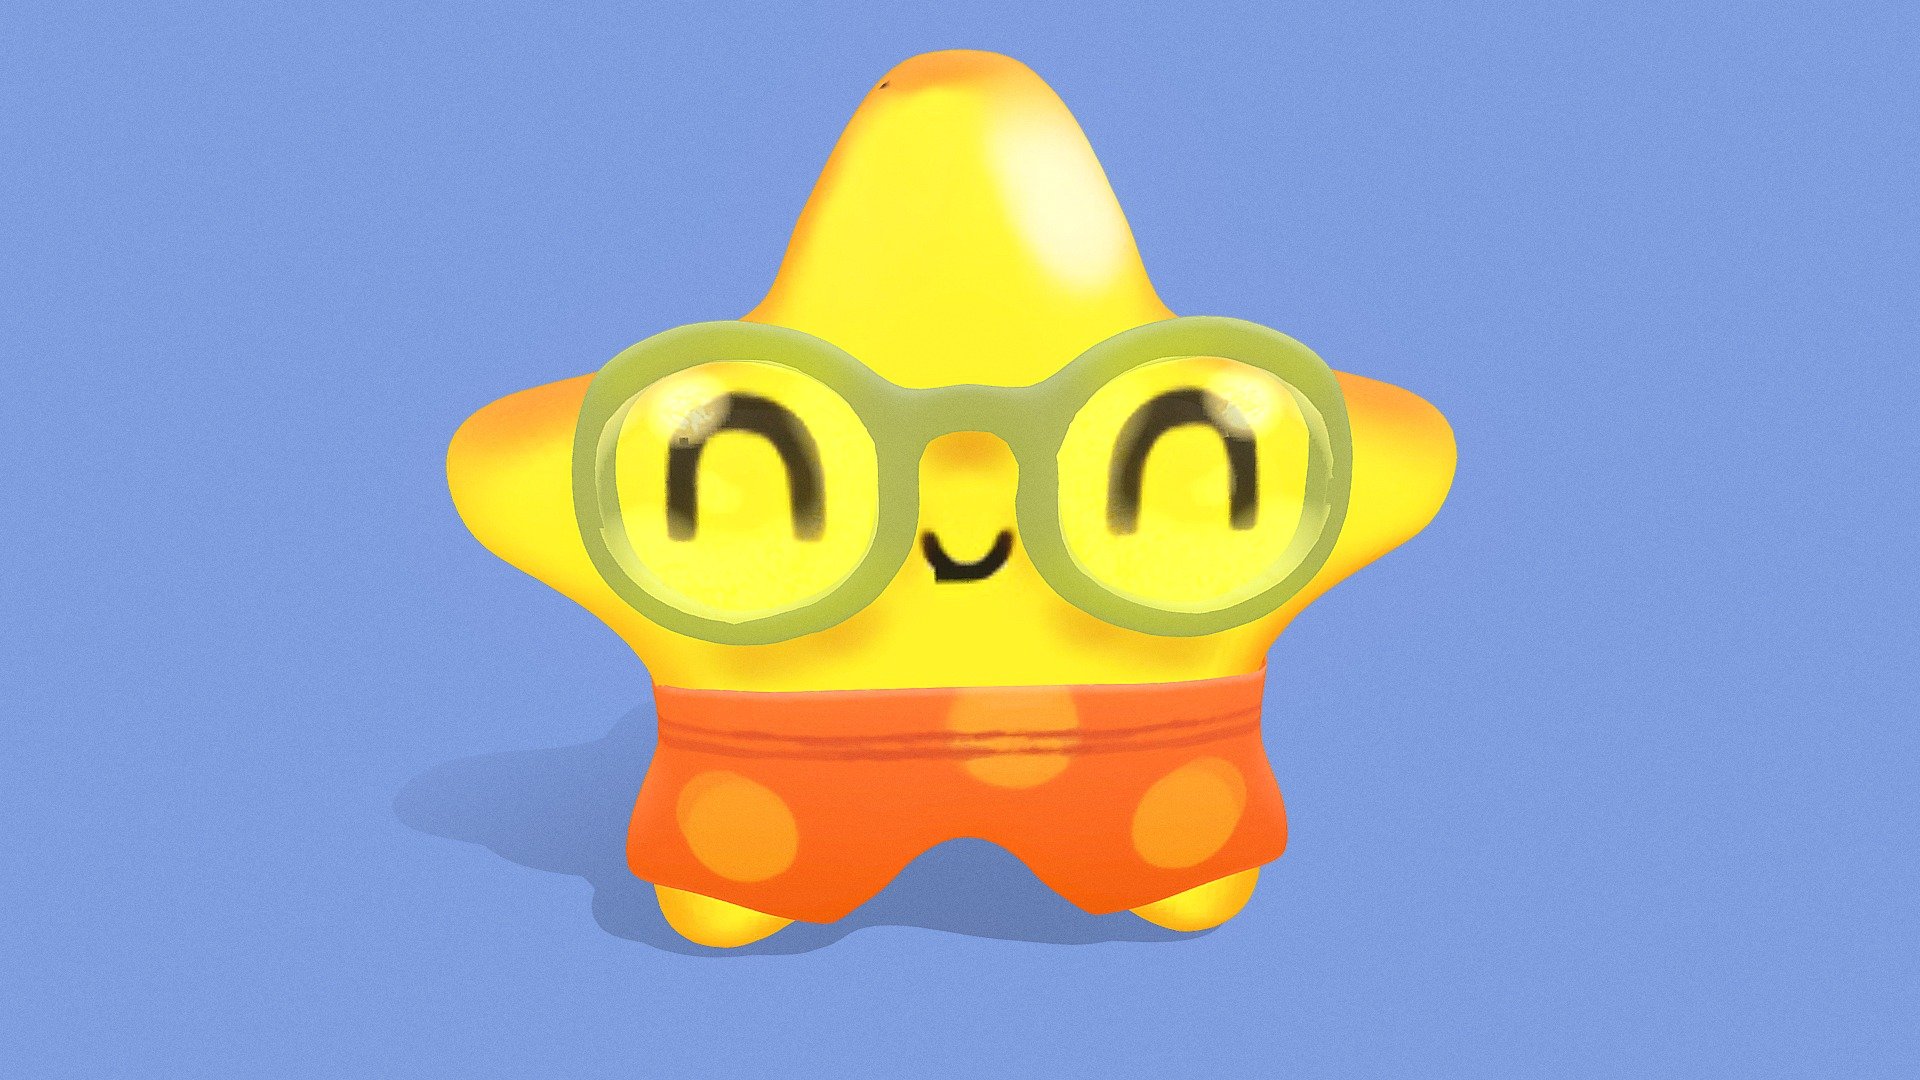 Sculpt inspired by image found on pinterest: https://www.pinterest.com/pin/273030796151912639/

https://www.pinterest.com/pin/273030796151912639/ - Cute Star Sculpt - Download Free 3D model by dartuchiwa 3d model